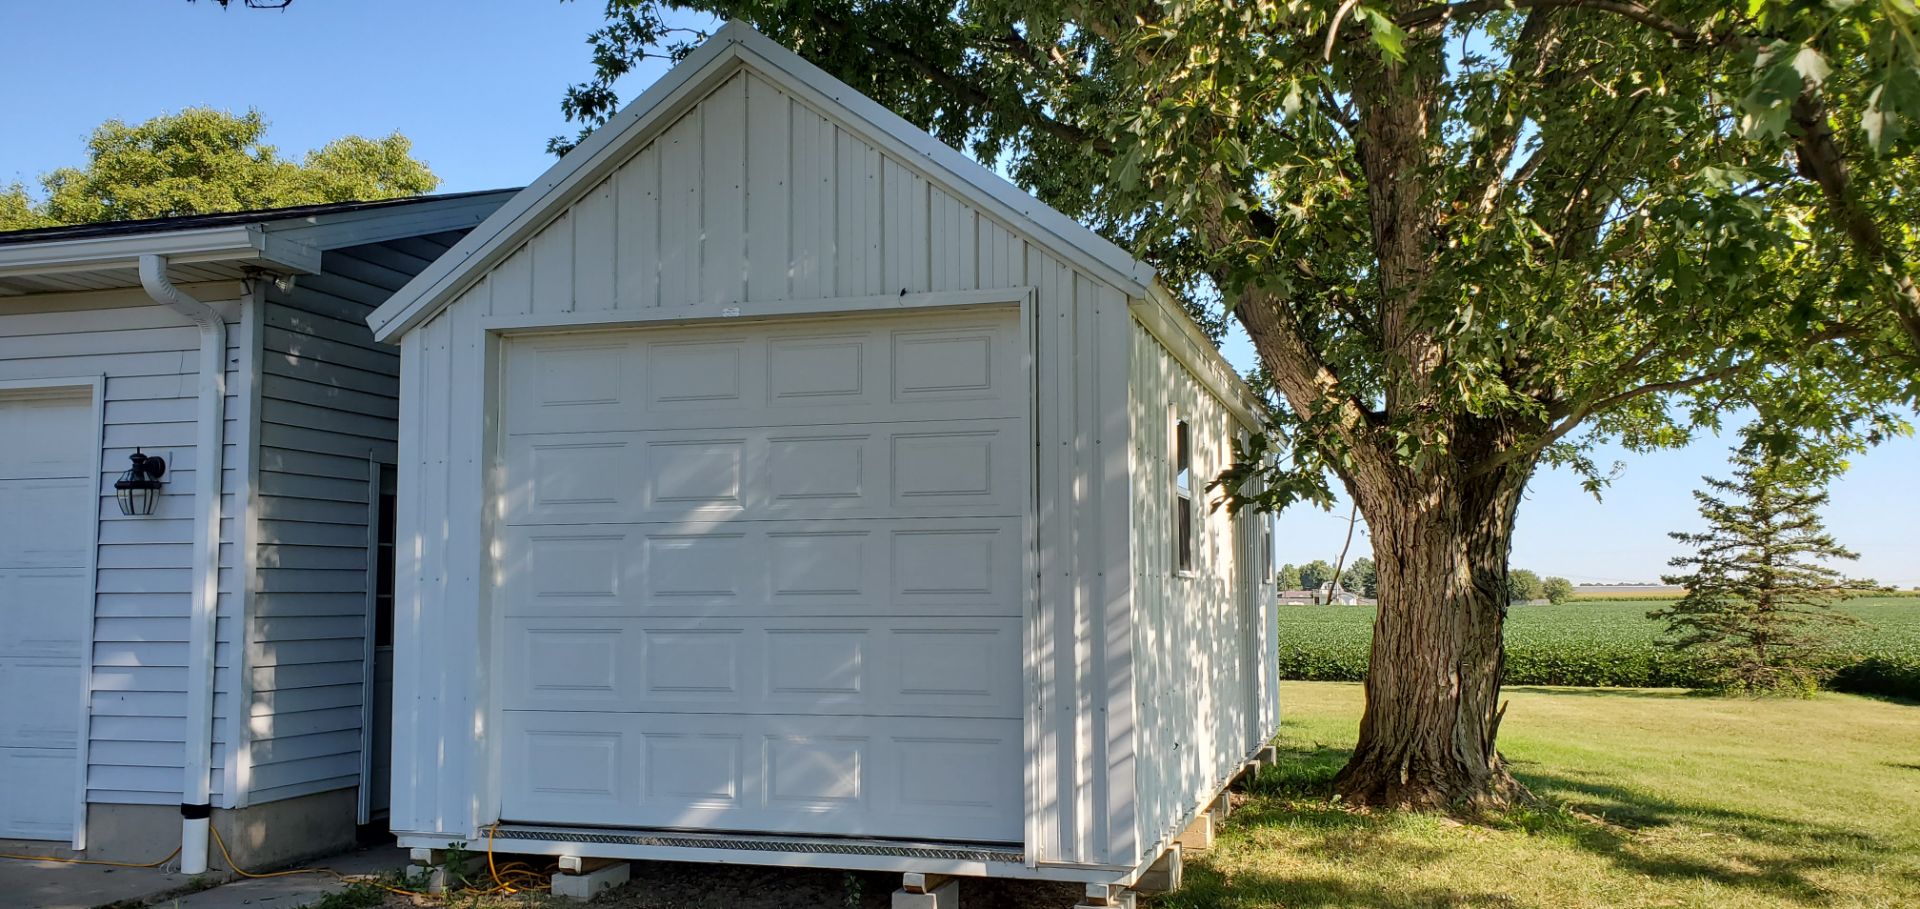 Yoder Portable 12’ x 24’ x 13' 4" High Garage Building, Full 8’ Walls, Like New, Fully Insulated, - Image 2 of 8